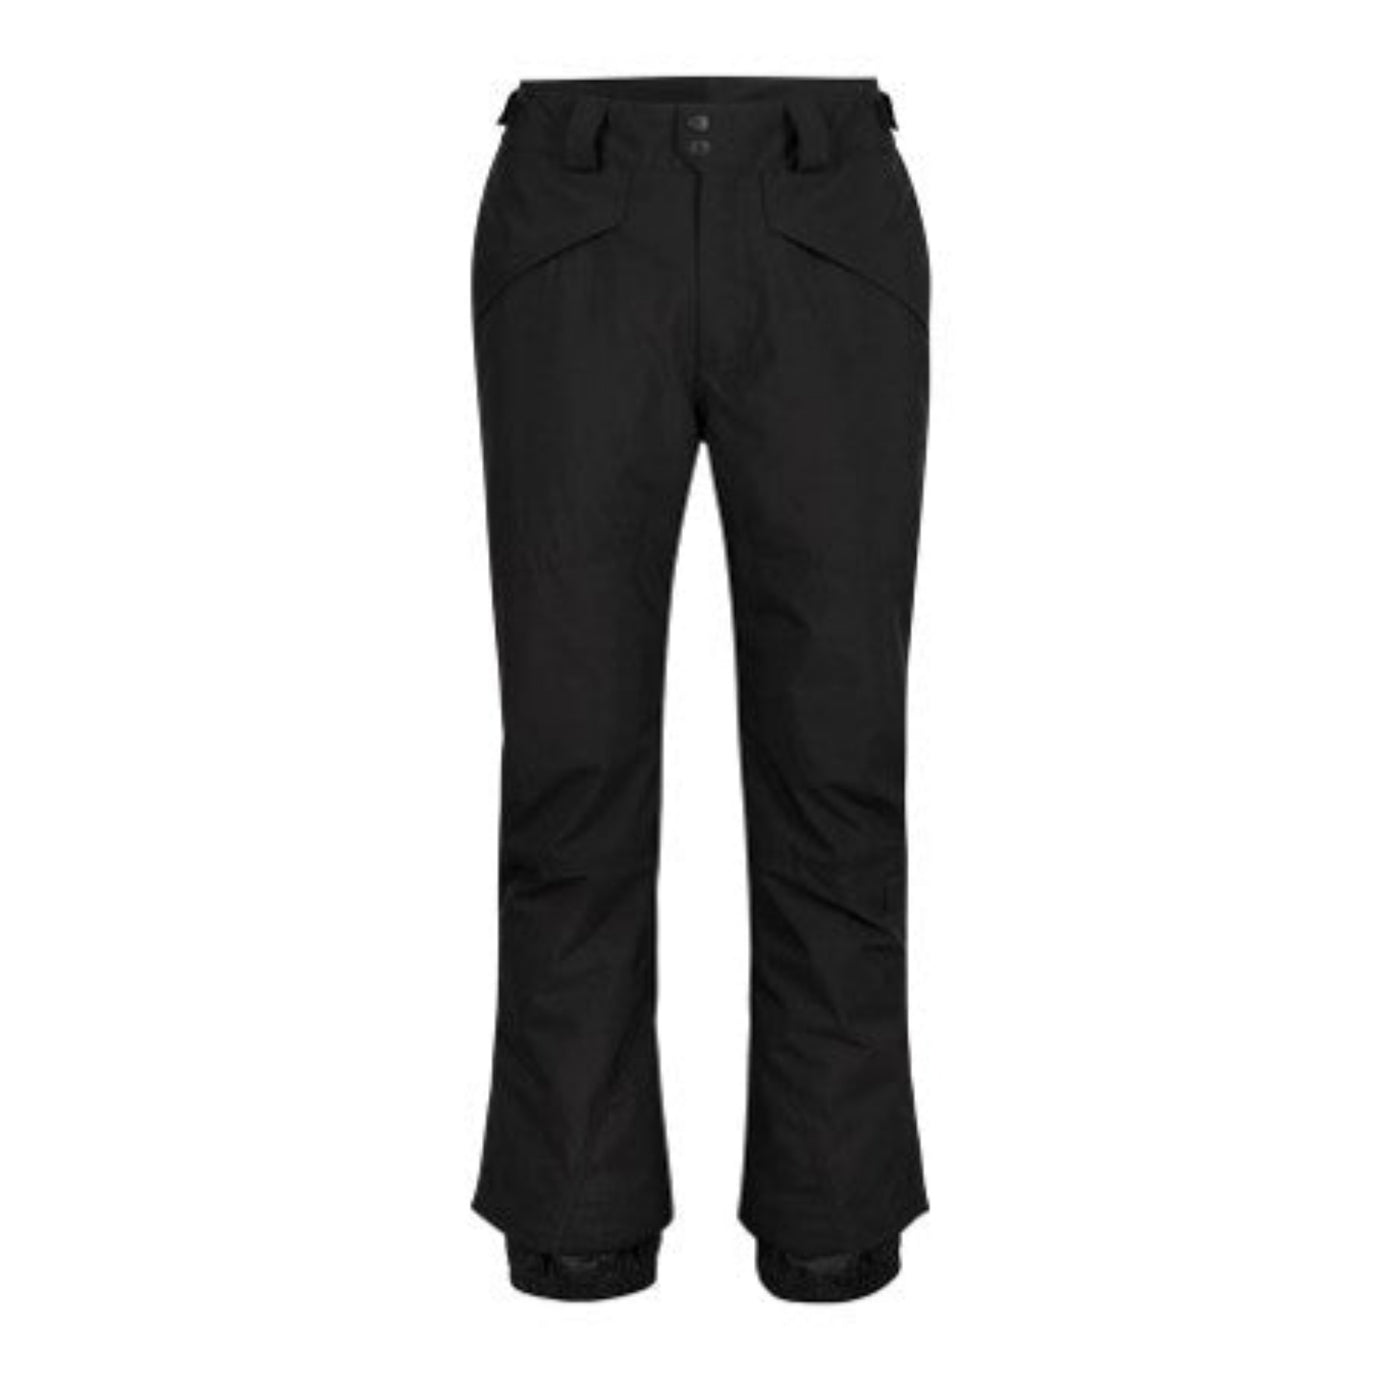 O'Neill Hammer Insulated Pant - Black Out